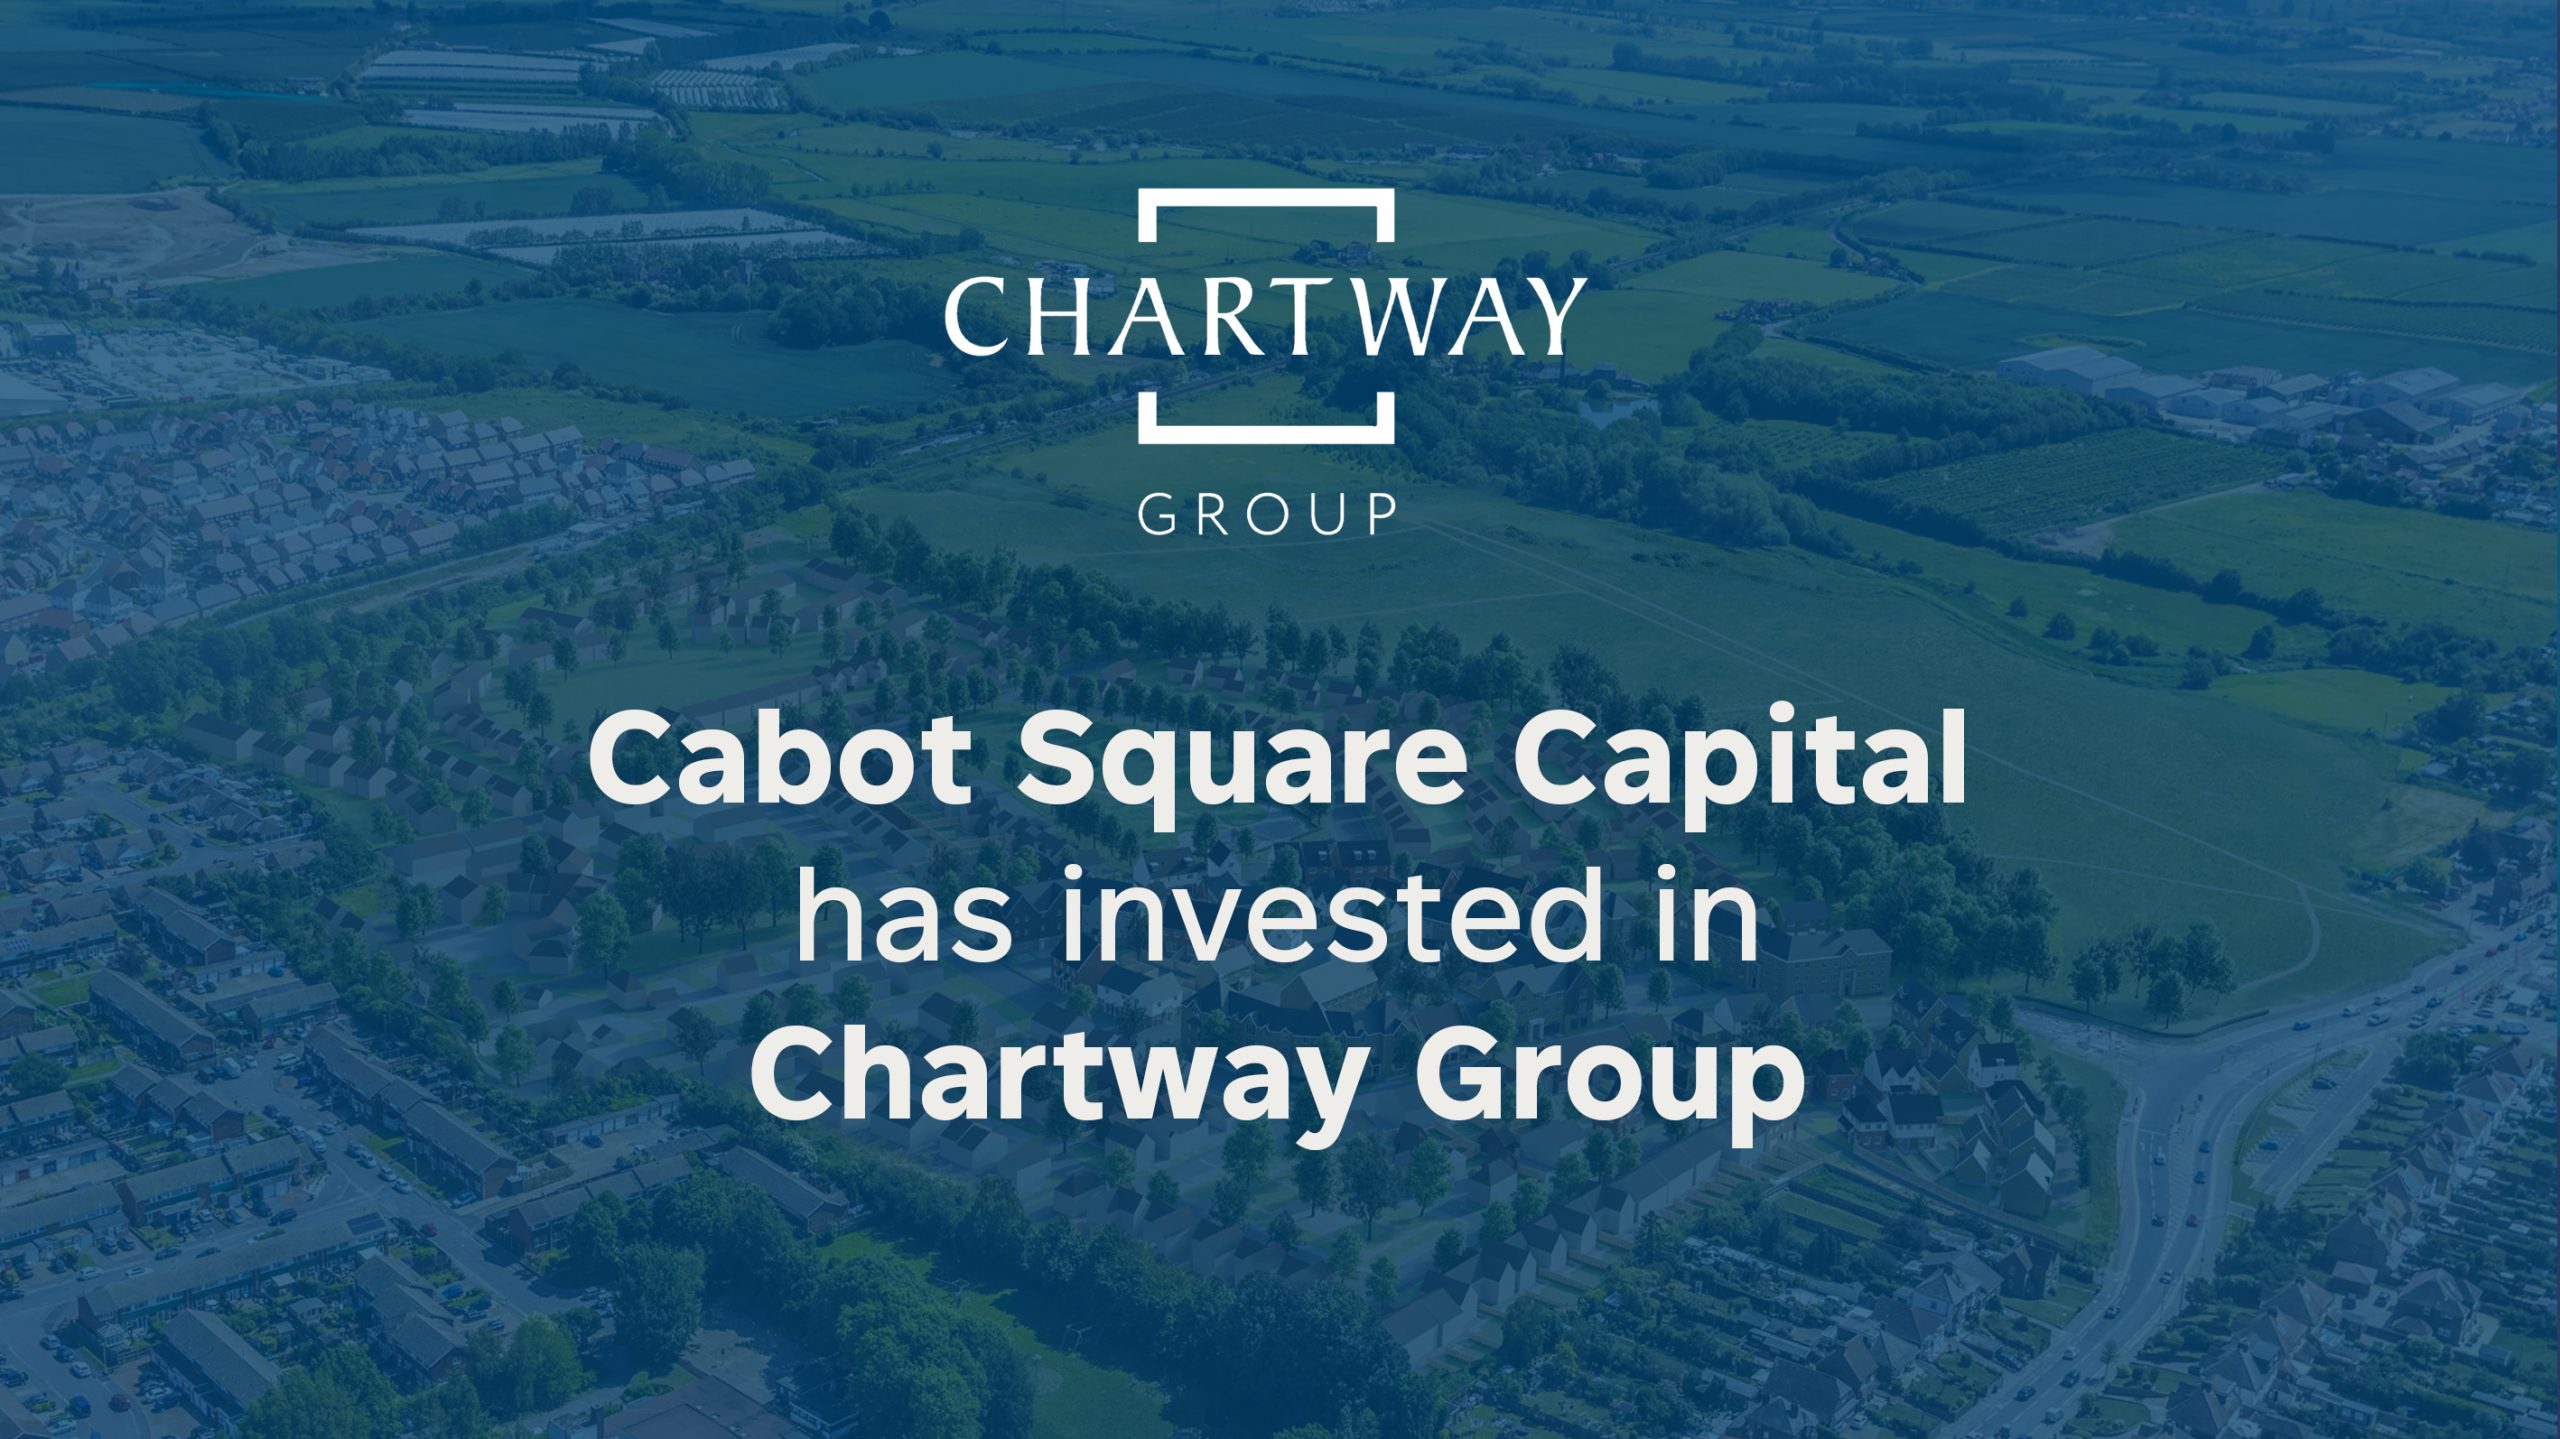 CABOT SQUARE CAPITAL ACQUIRES MAJORITY STAKE IN CHARTWAY GROUP